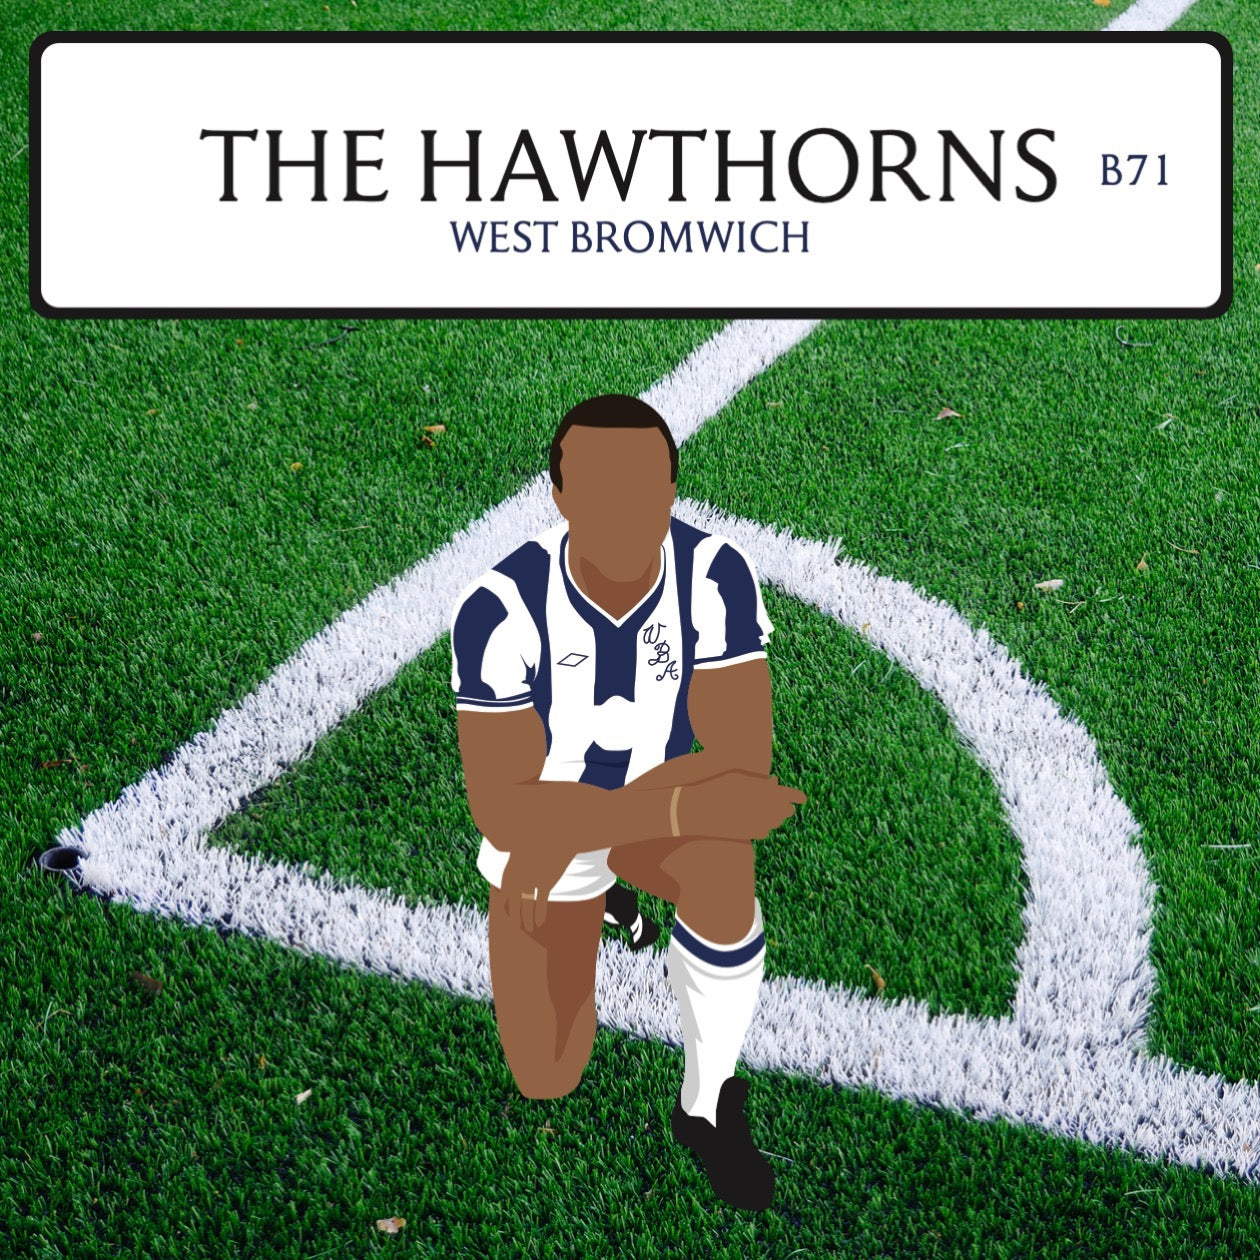 The Hawthorns 2 Seater Sofa (West Bromwich Albion FC)